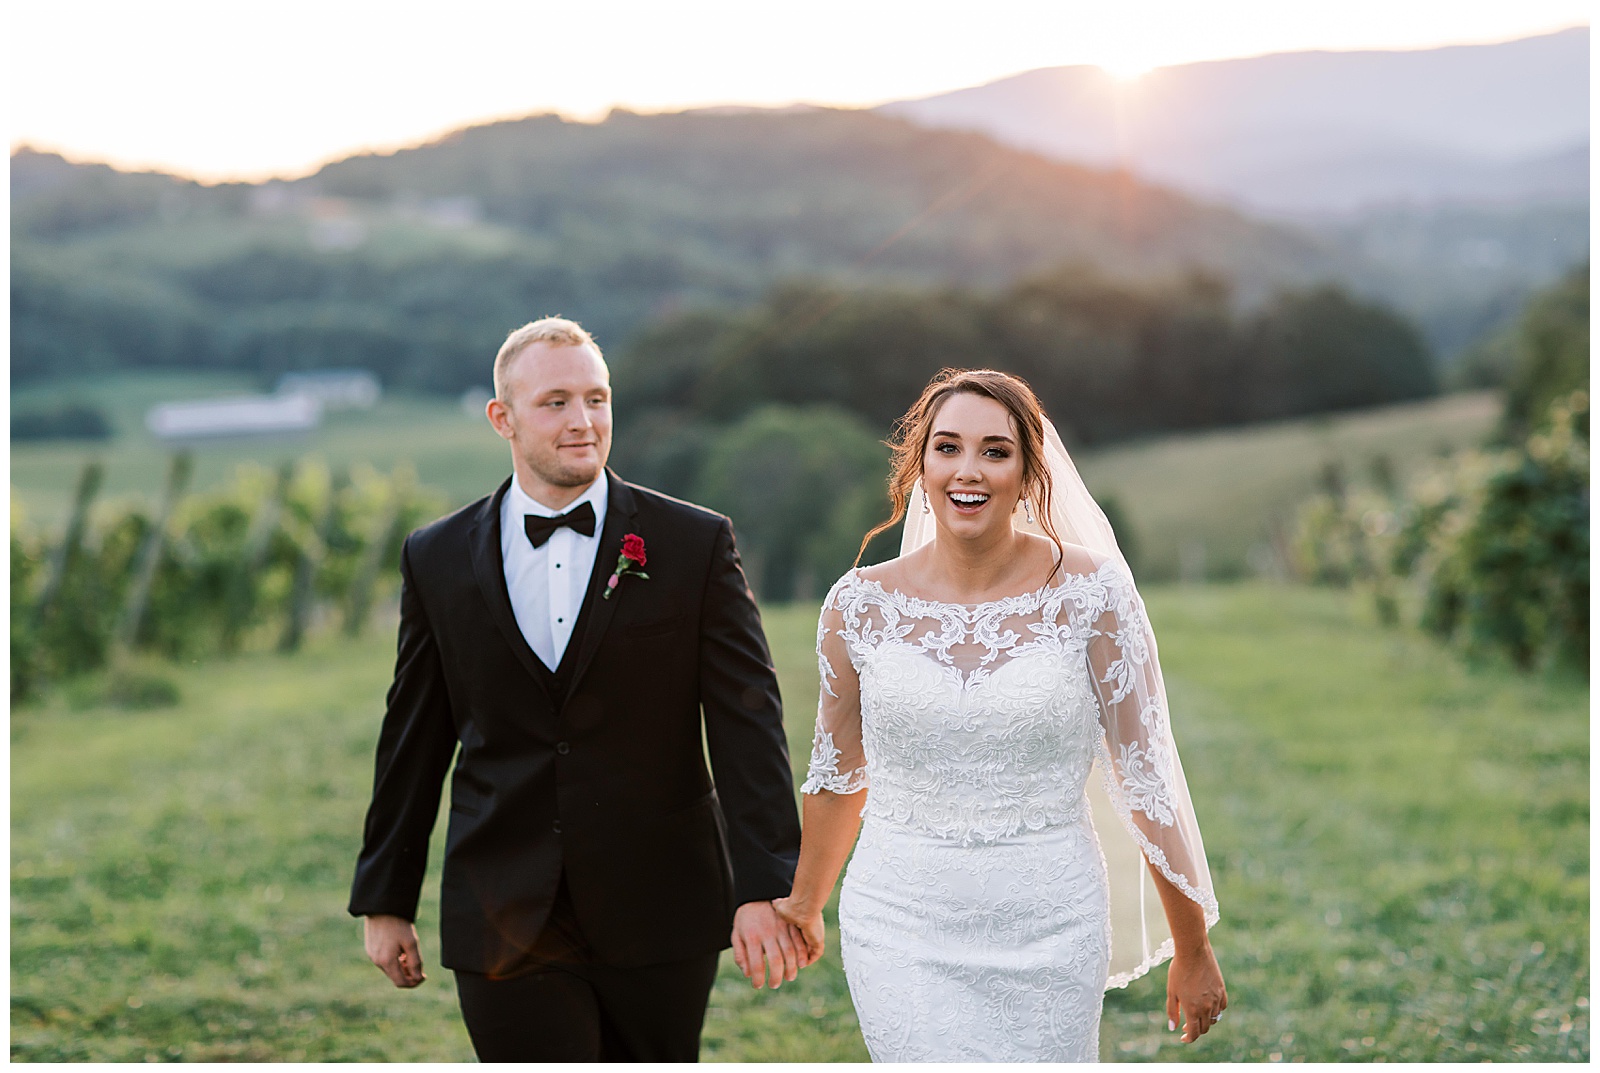 A young woman with dark brown hair laughs while holding a tall blonde man in a black tux's hand while they stroll through the vineyard at sunset